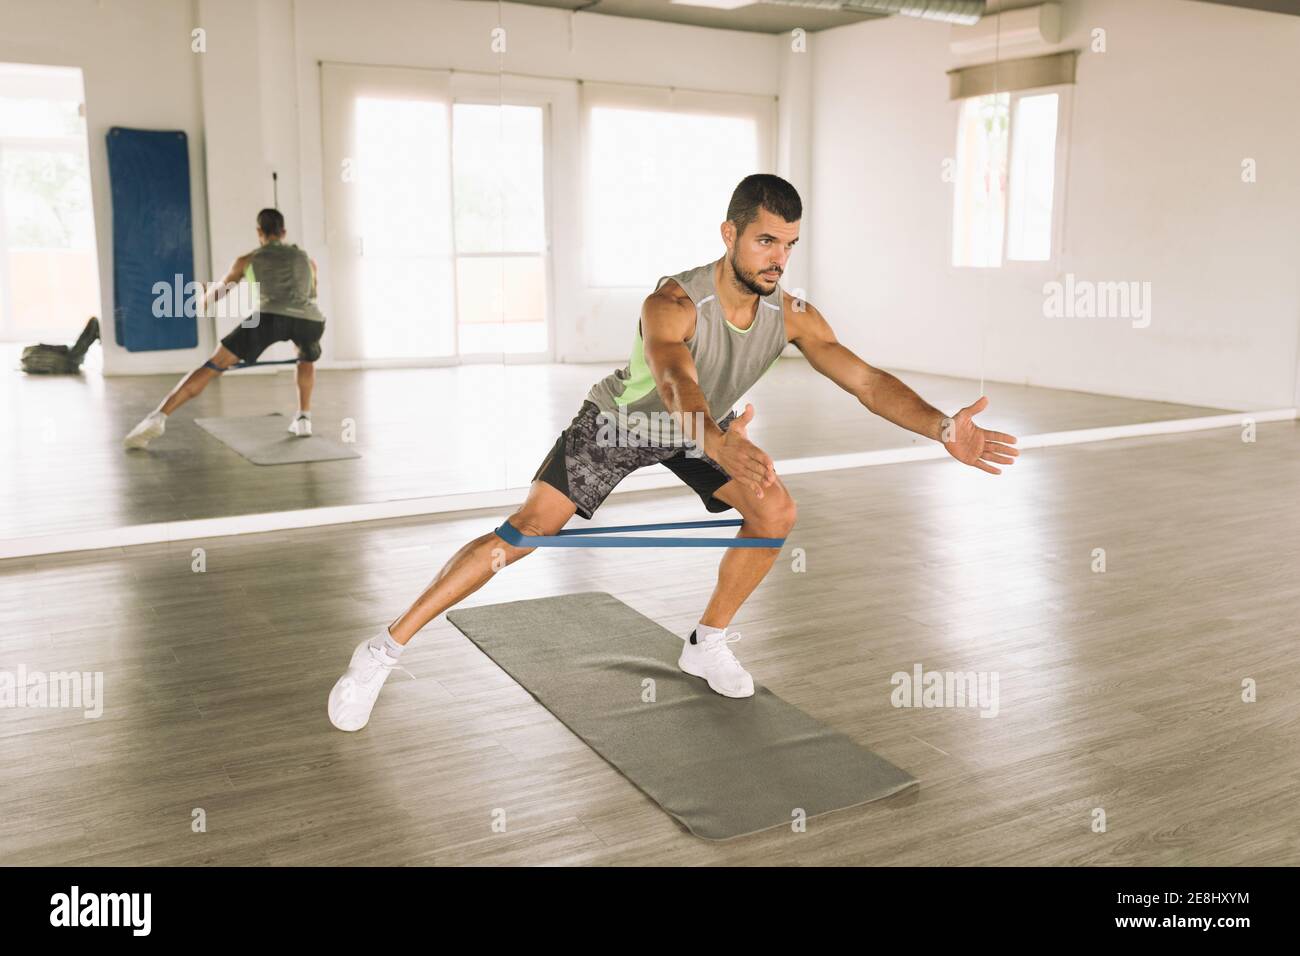 https://c8.alamy.com/comp/2E8HXYM/full-length-of-concentrated-young-athletic-guy-in-sportswear-doing-side-lunges-exercise-with-elastic-band-while-training-alone-in-spacious-fitness-stu-2E8HXYM.jpg